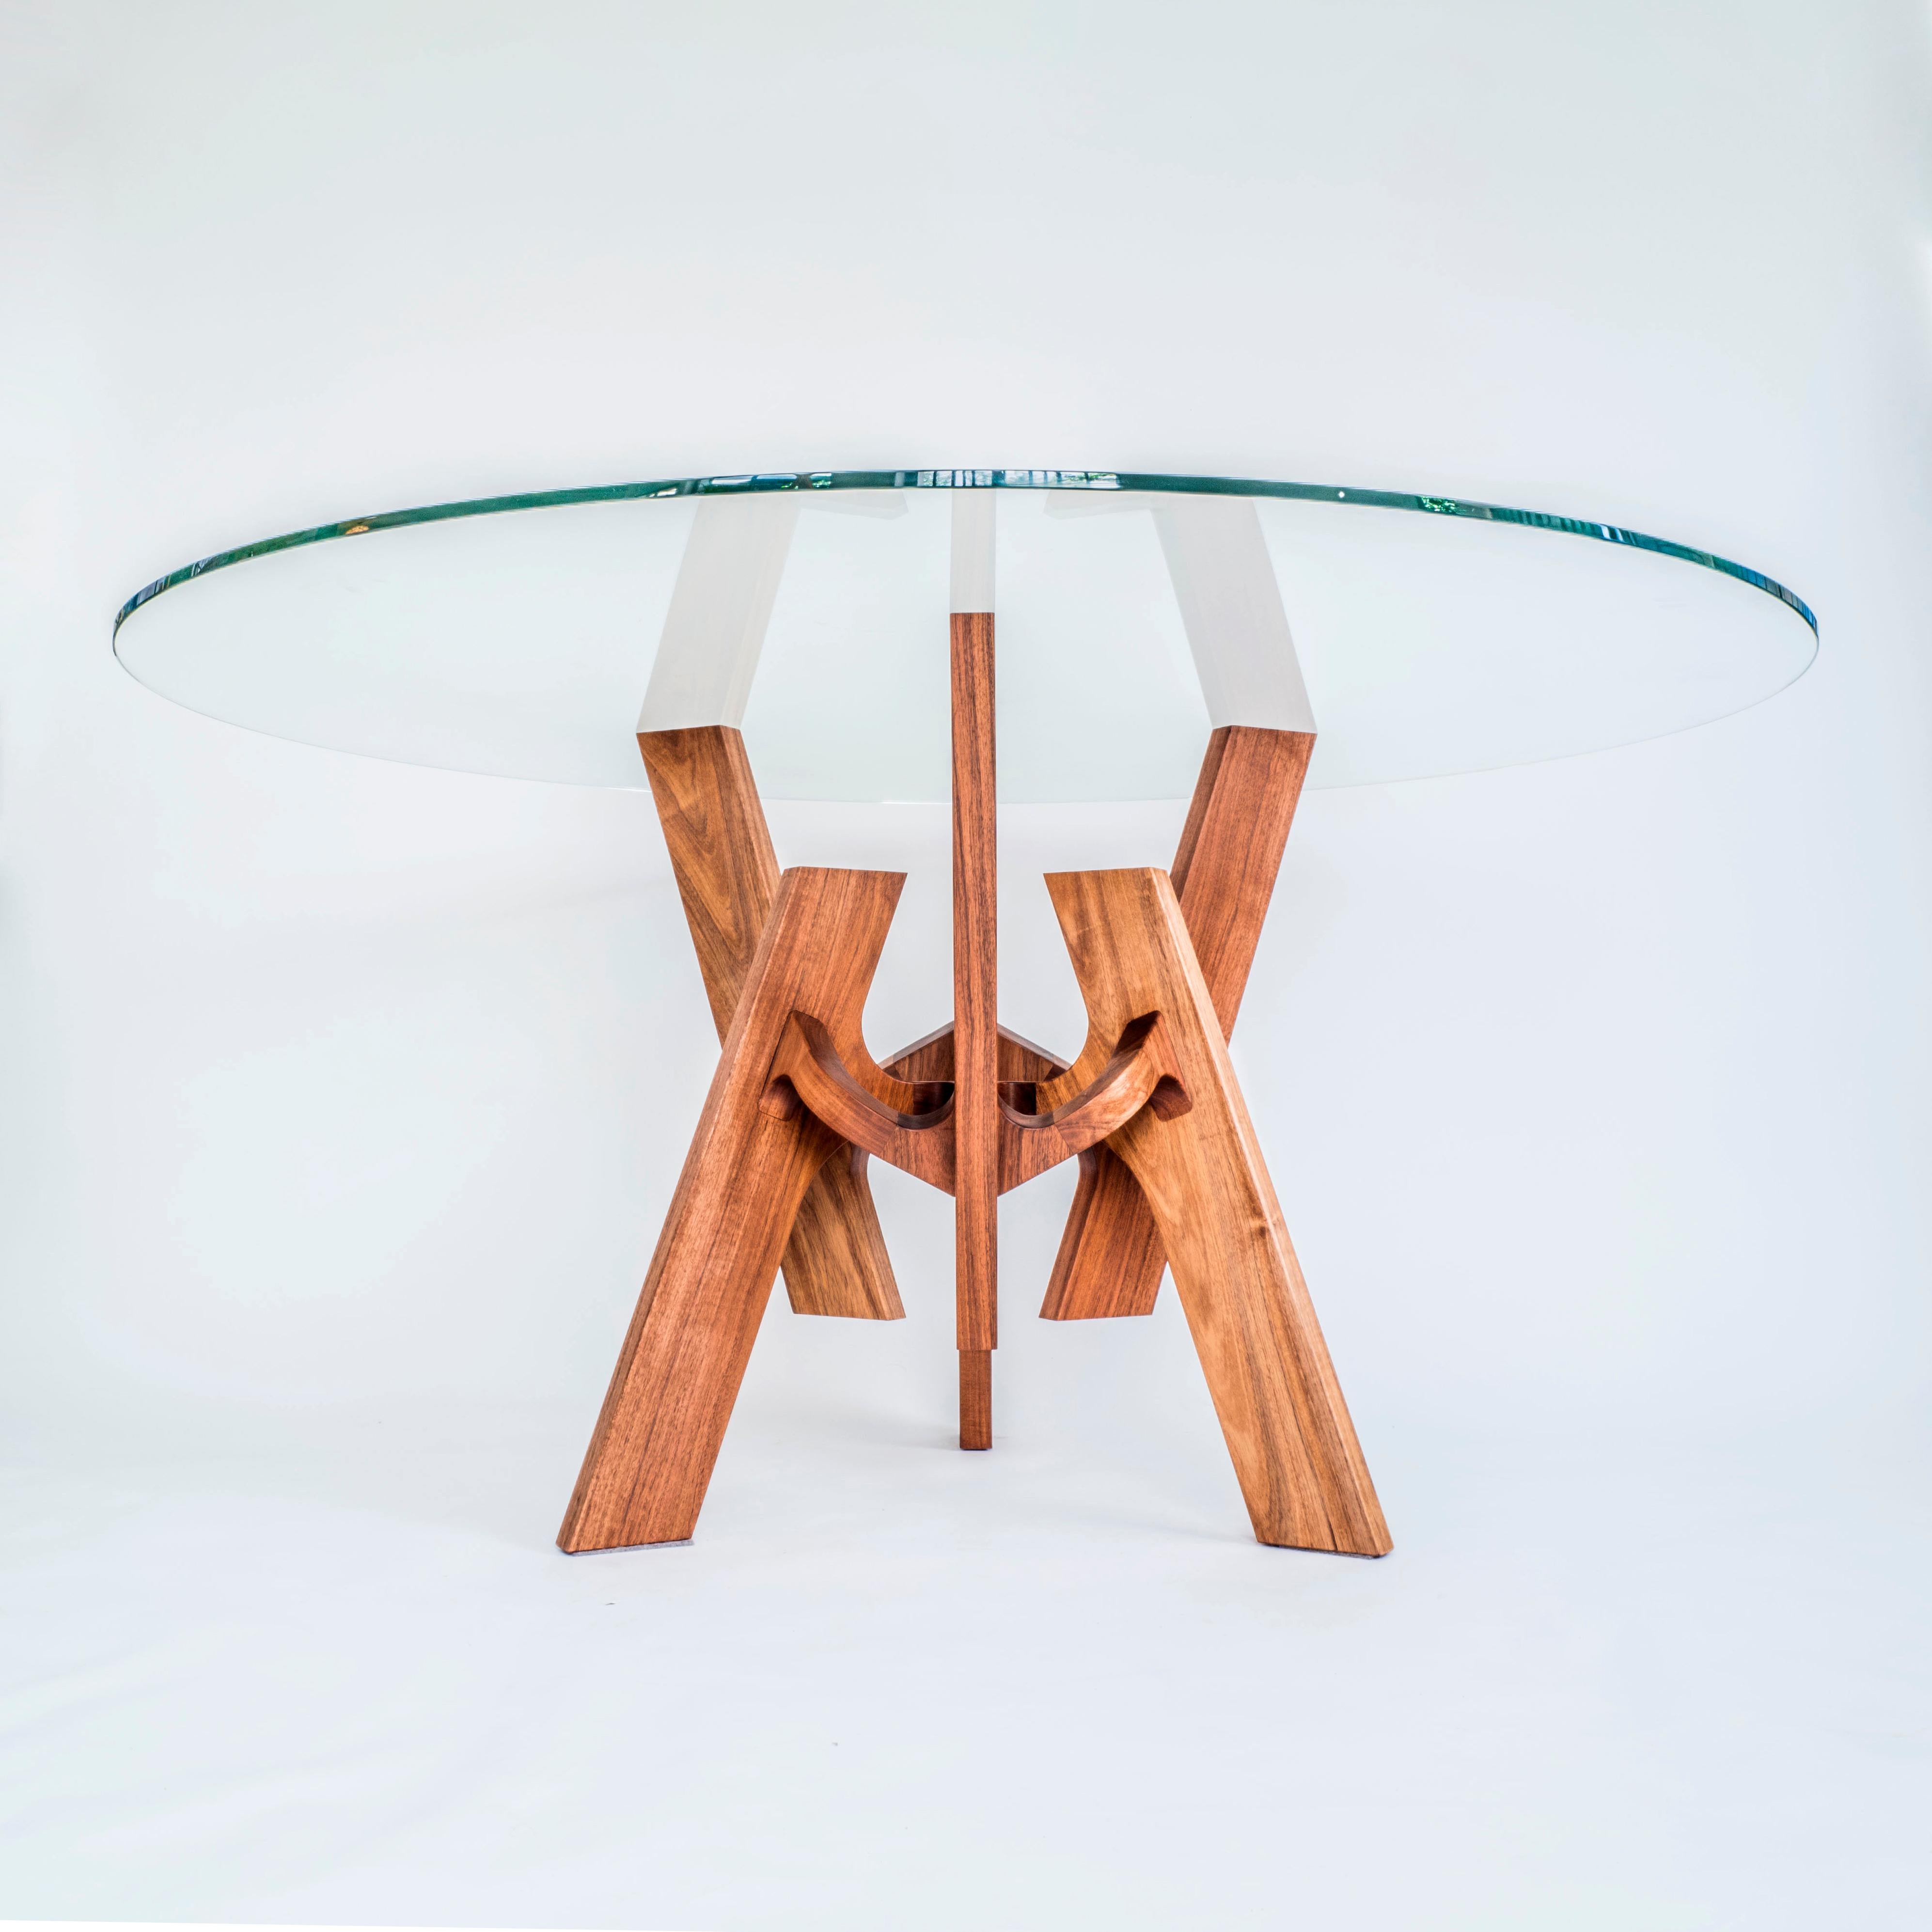 Astra, Geometric Sculptural Center Table Made of Solid Wood by Pedro Cerisola For Sale 13